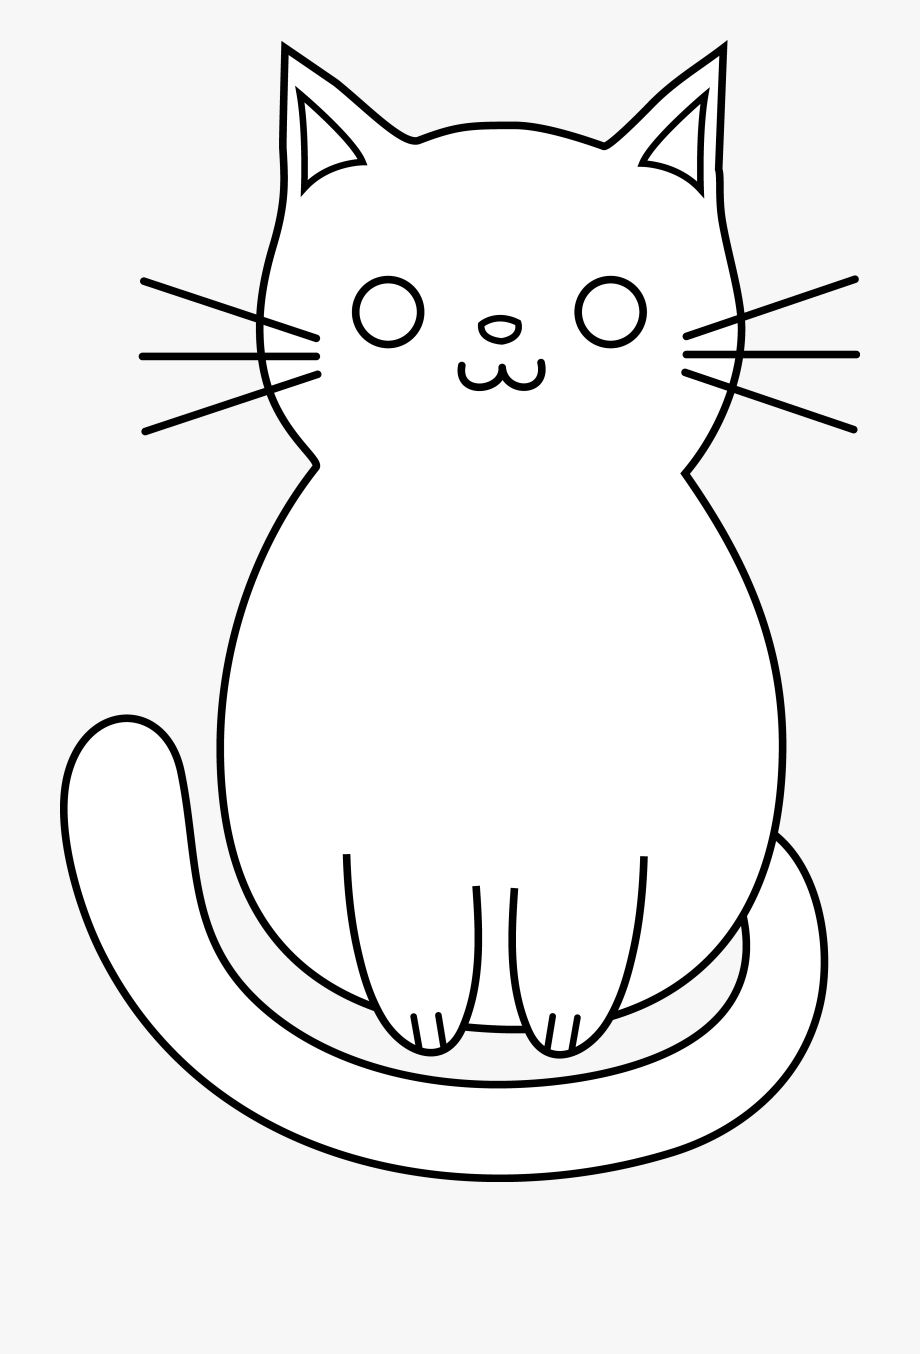 easy cat head drawing - Clip Art Library